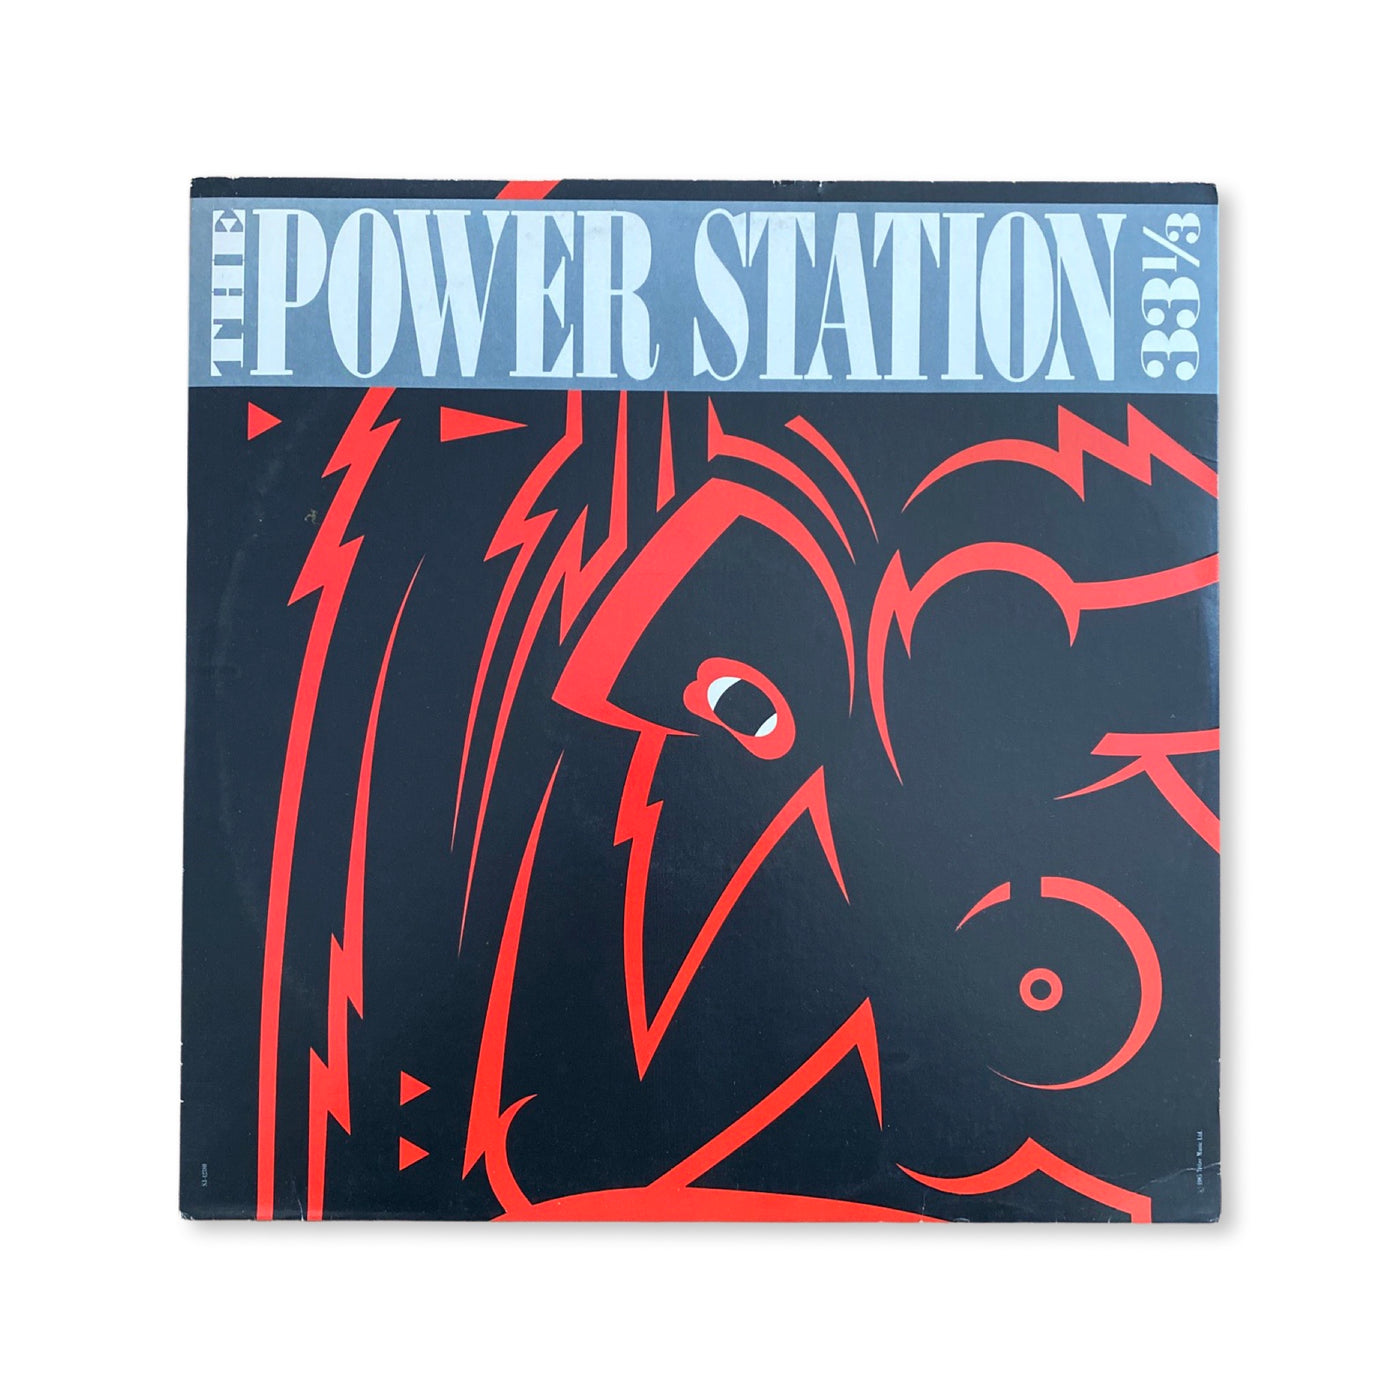 The Power Station - The Power Station 33⅓